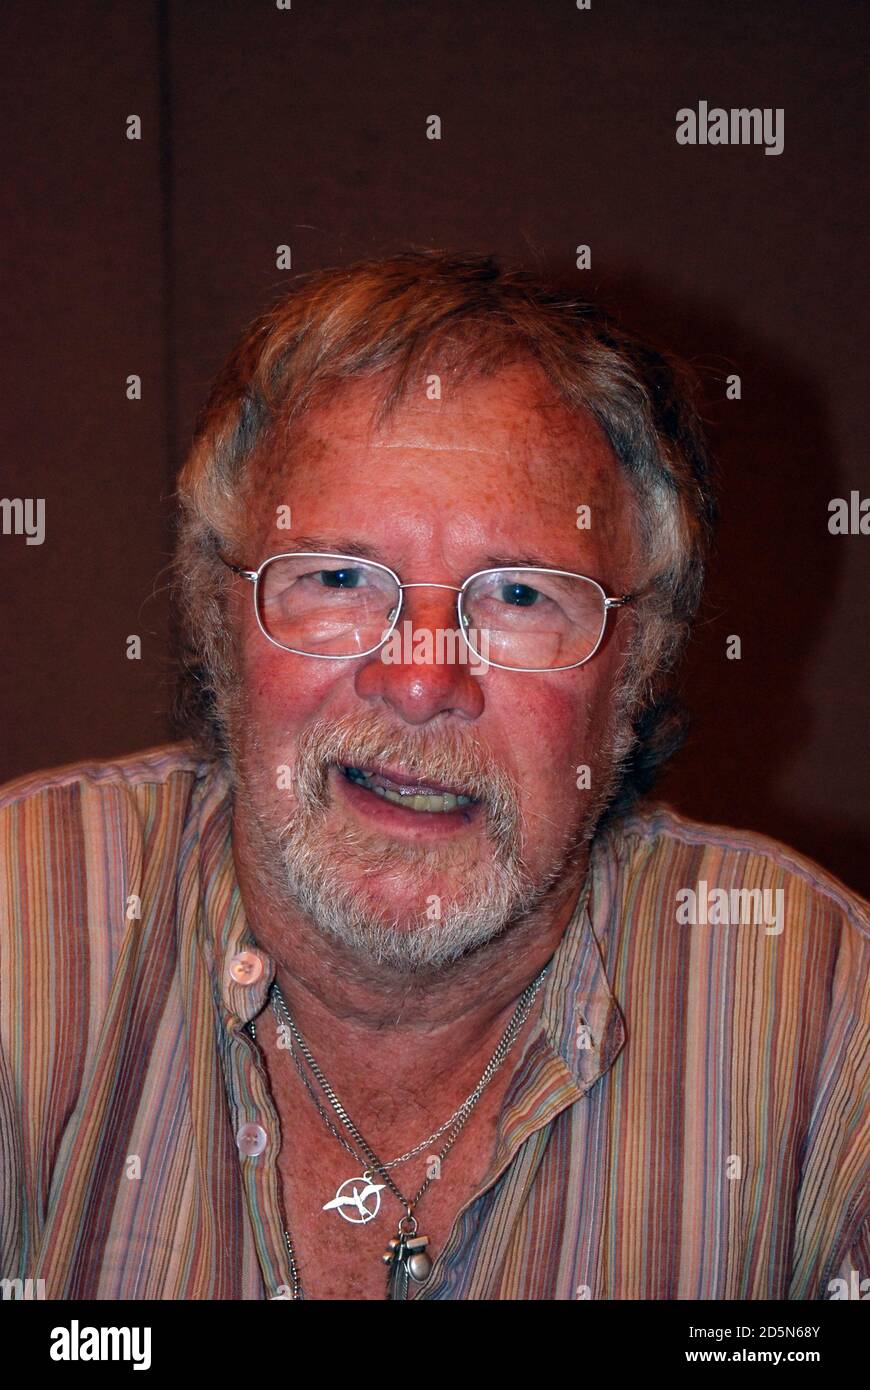 English actor, comedian, presenter, writer, and bird-watcher, Bill Oddie OBE, known for the classic British comedy, The Goodies, & BBC's Springwatch Stock Photo